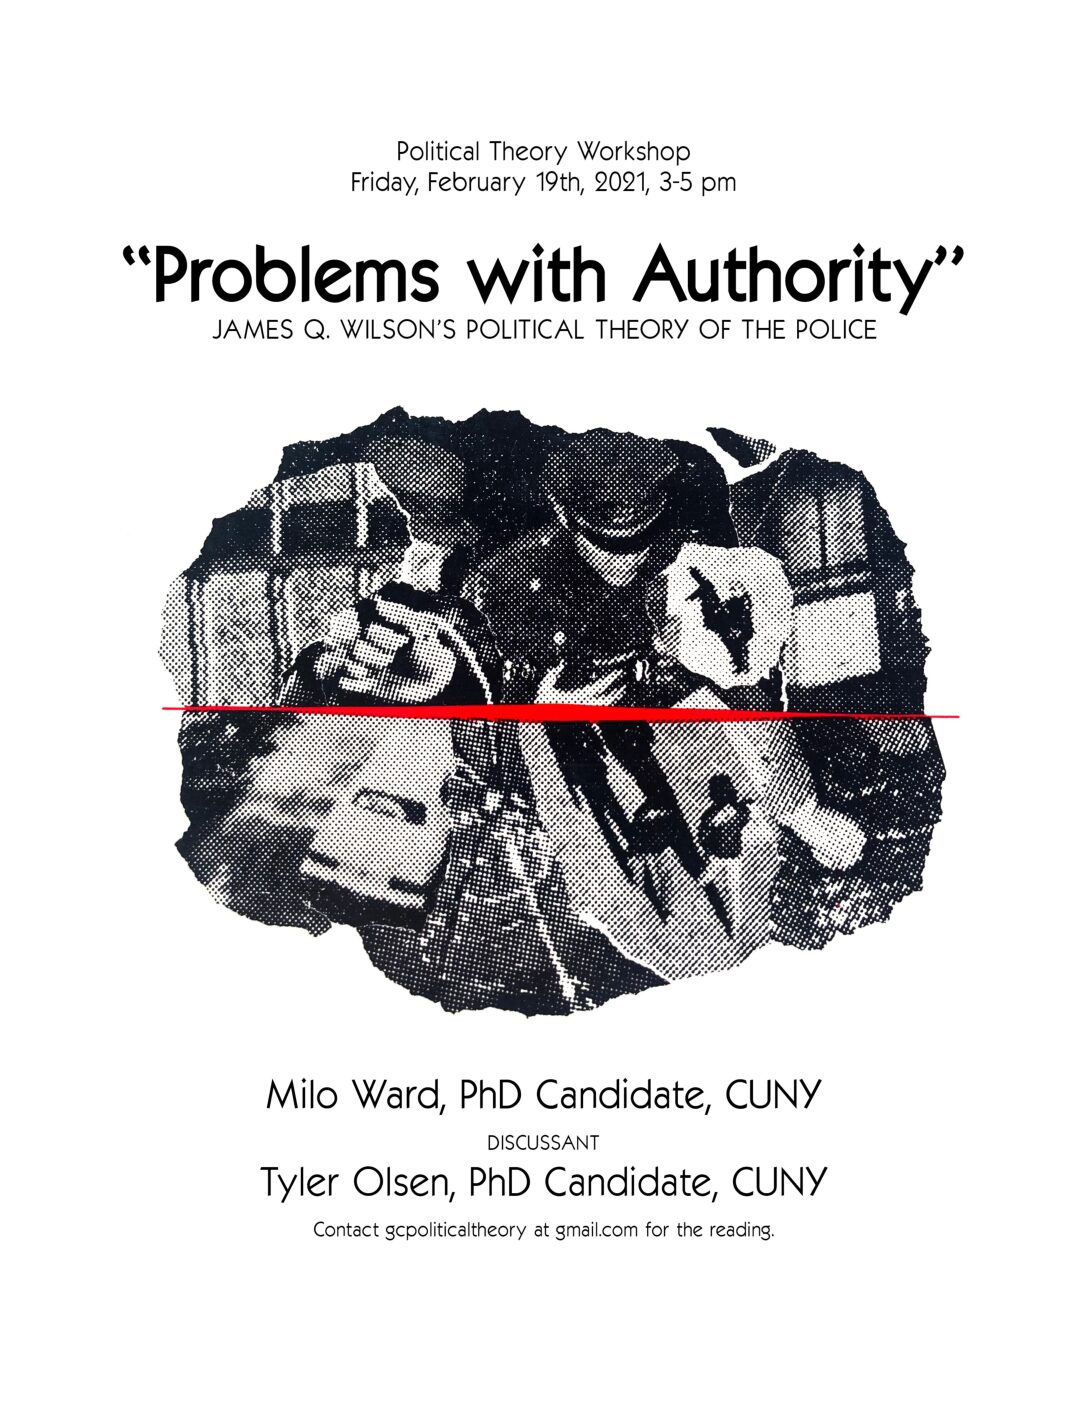 Political Theory Workshop: Milo Ward, “'Problems with Authority': James Q. Wilson's Political Theory of the Police,” Friday, February 19, 3-5PM